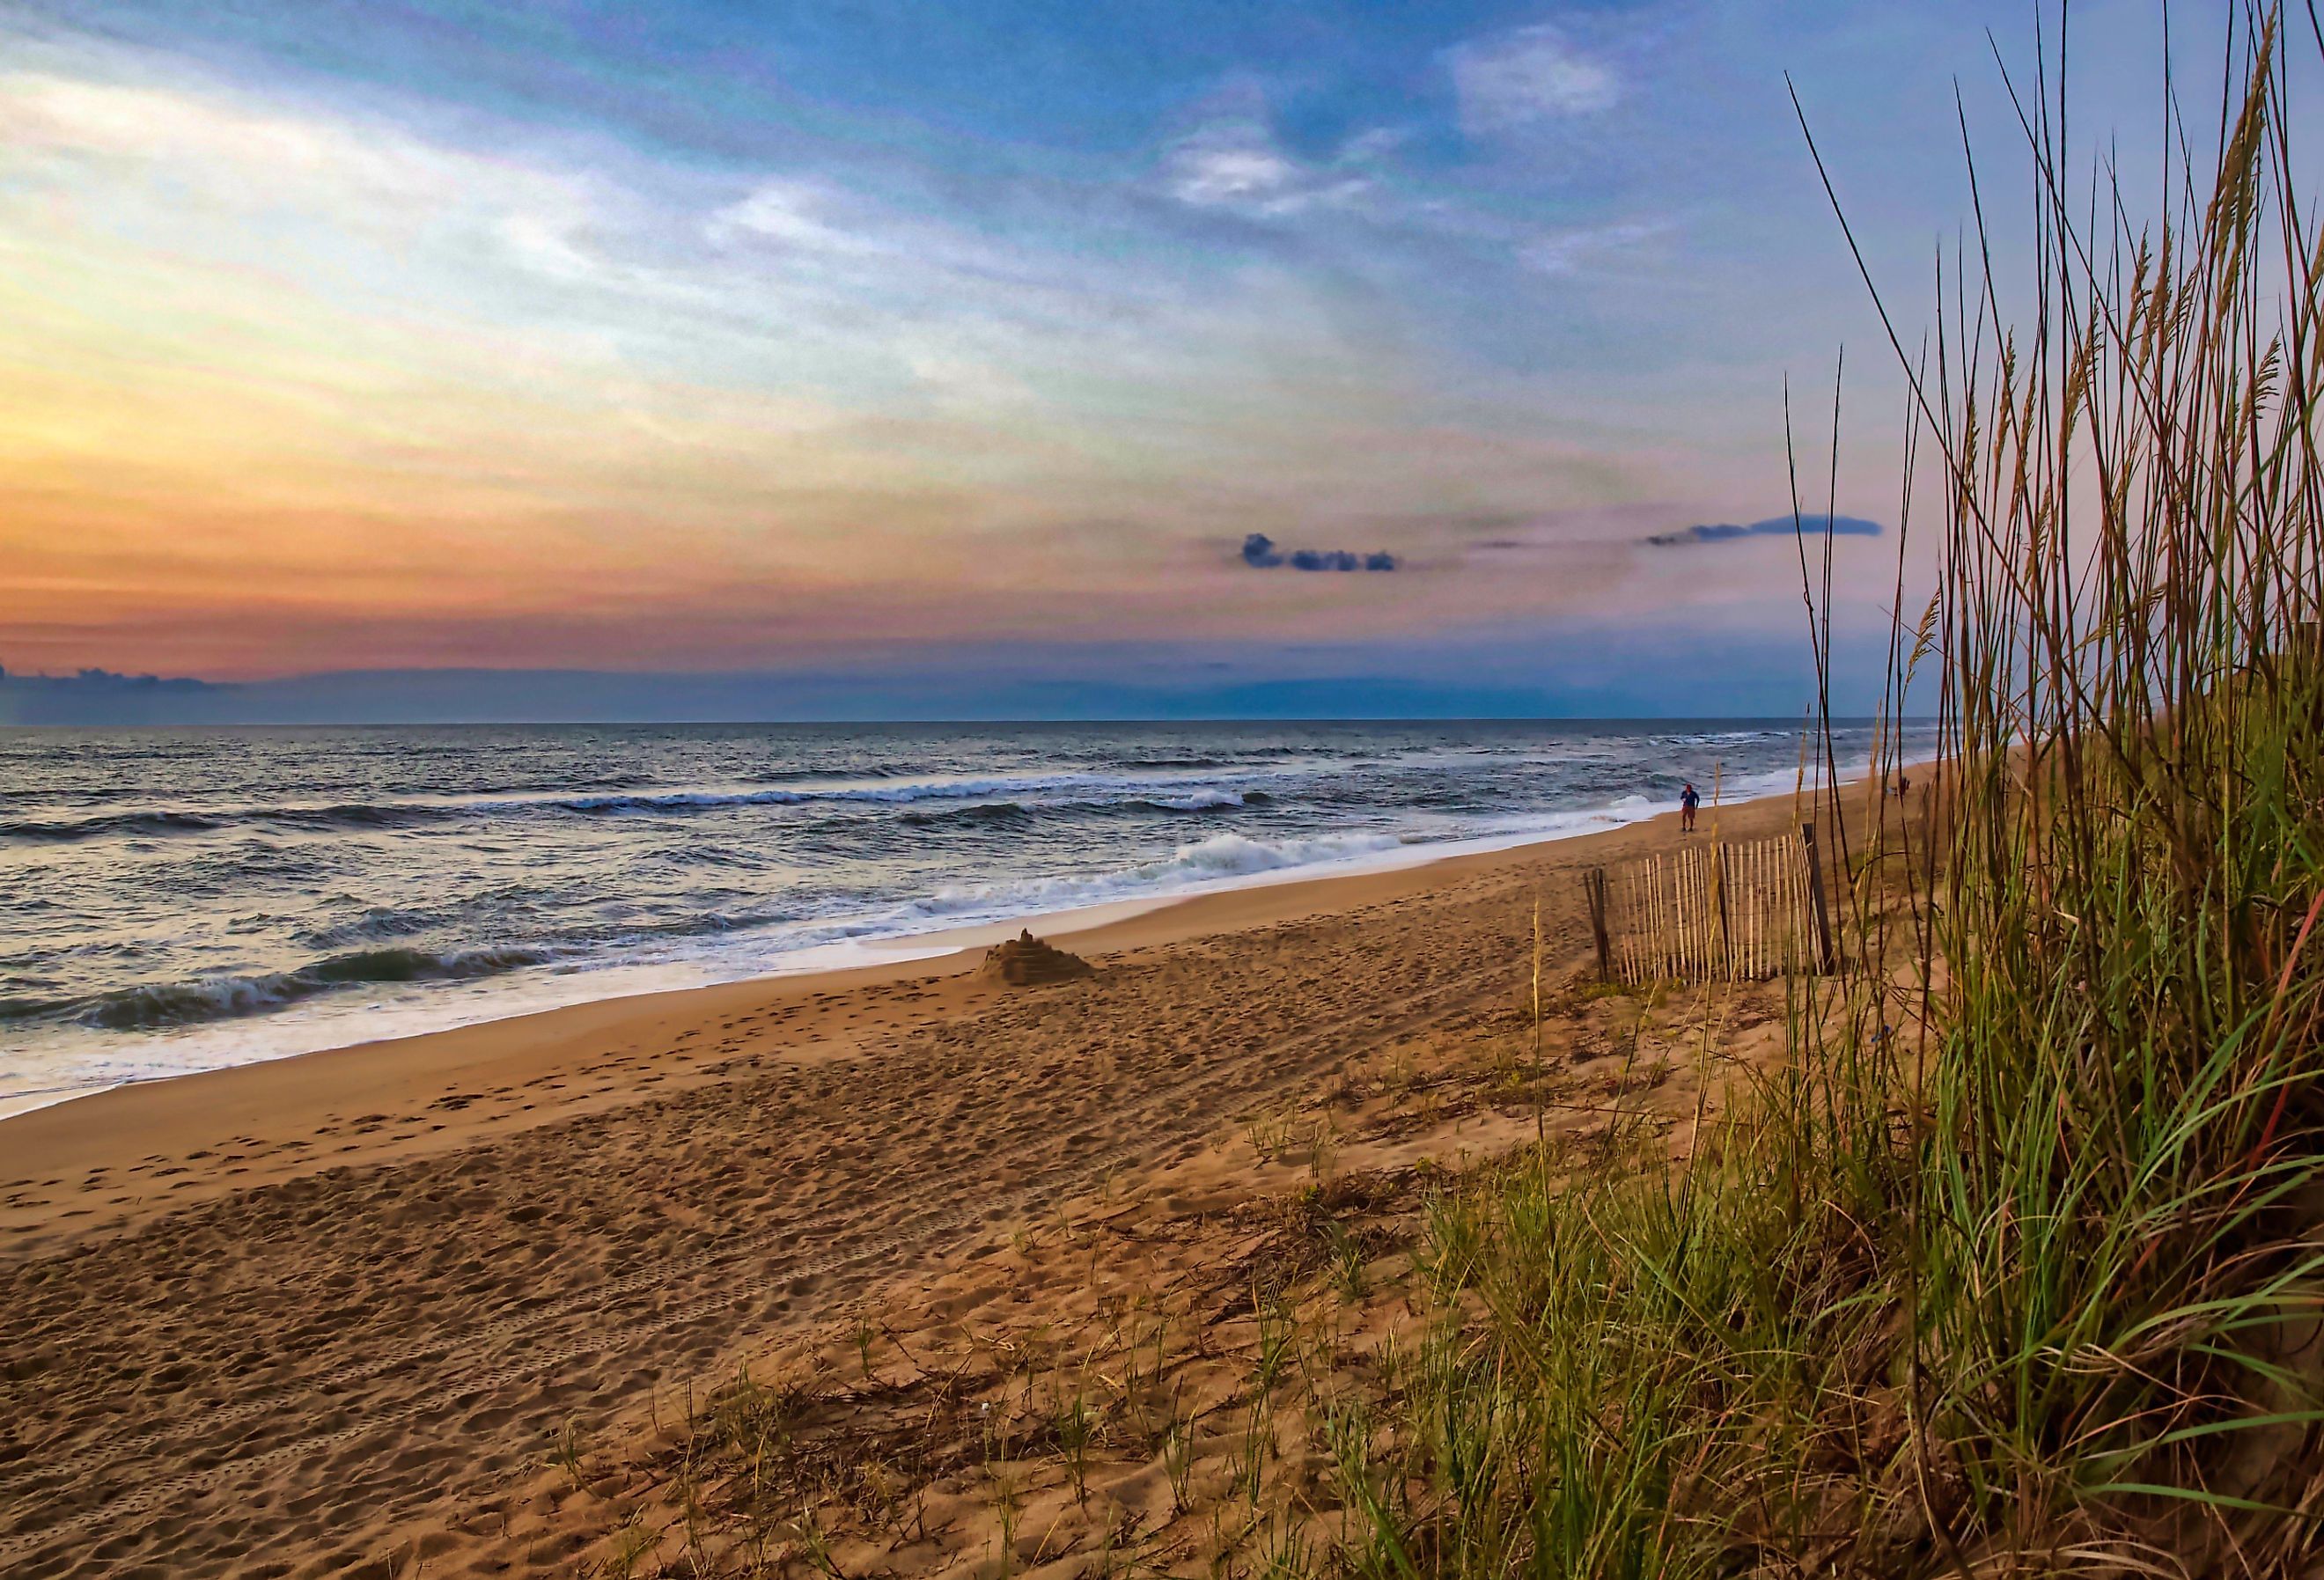 Colorful sunrise on a North Carolina beach, waves breaking on a sandy shore framed by dune grass. Duck, NC. Image credit Jeremy Tyree via Shutterstock. 